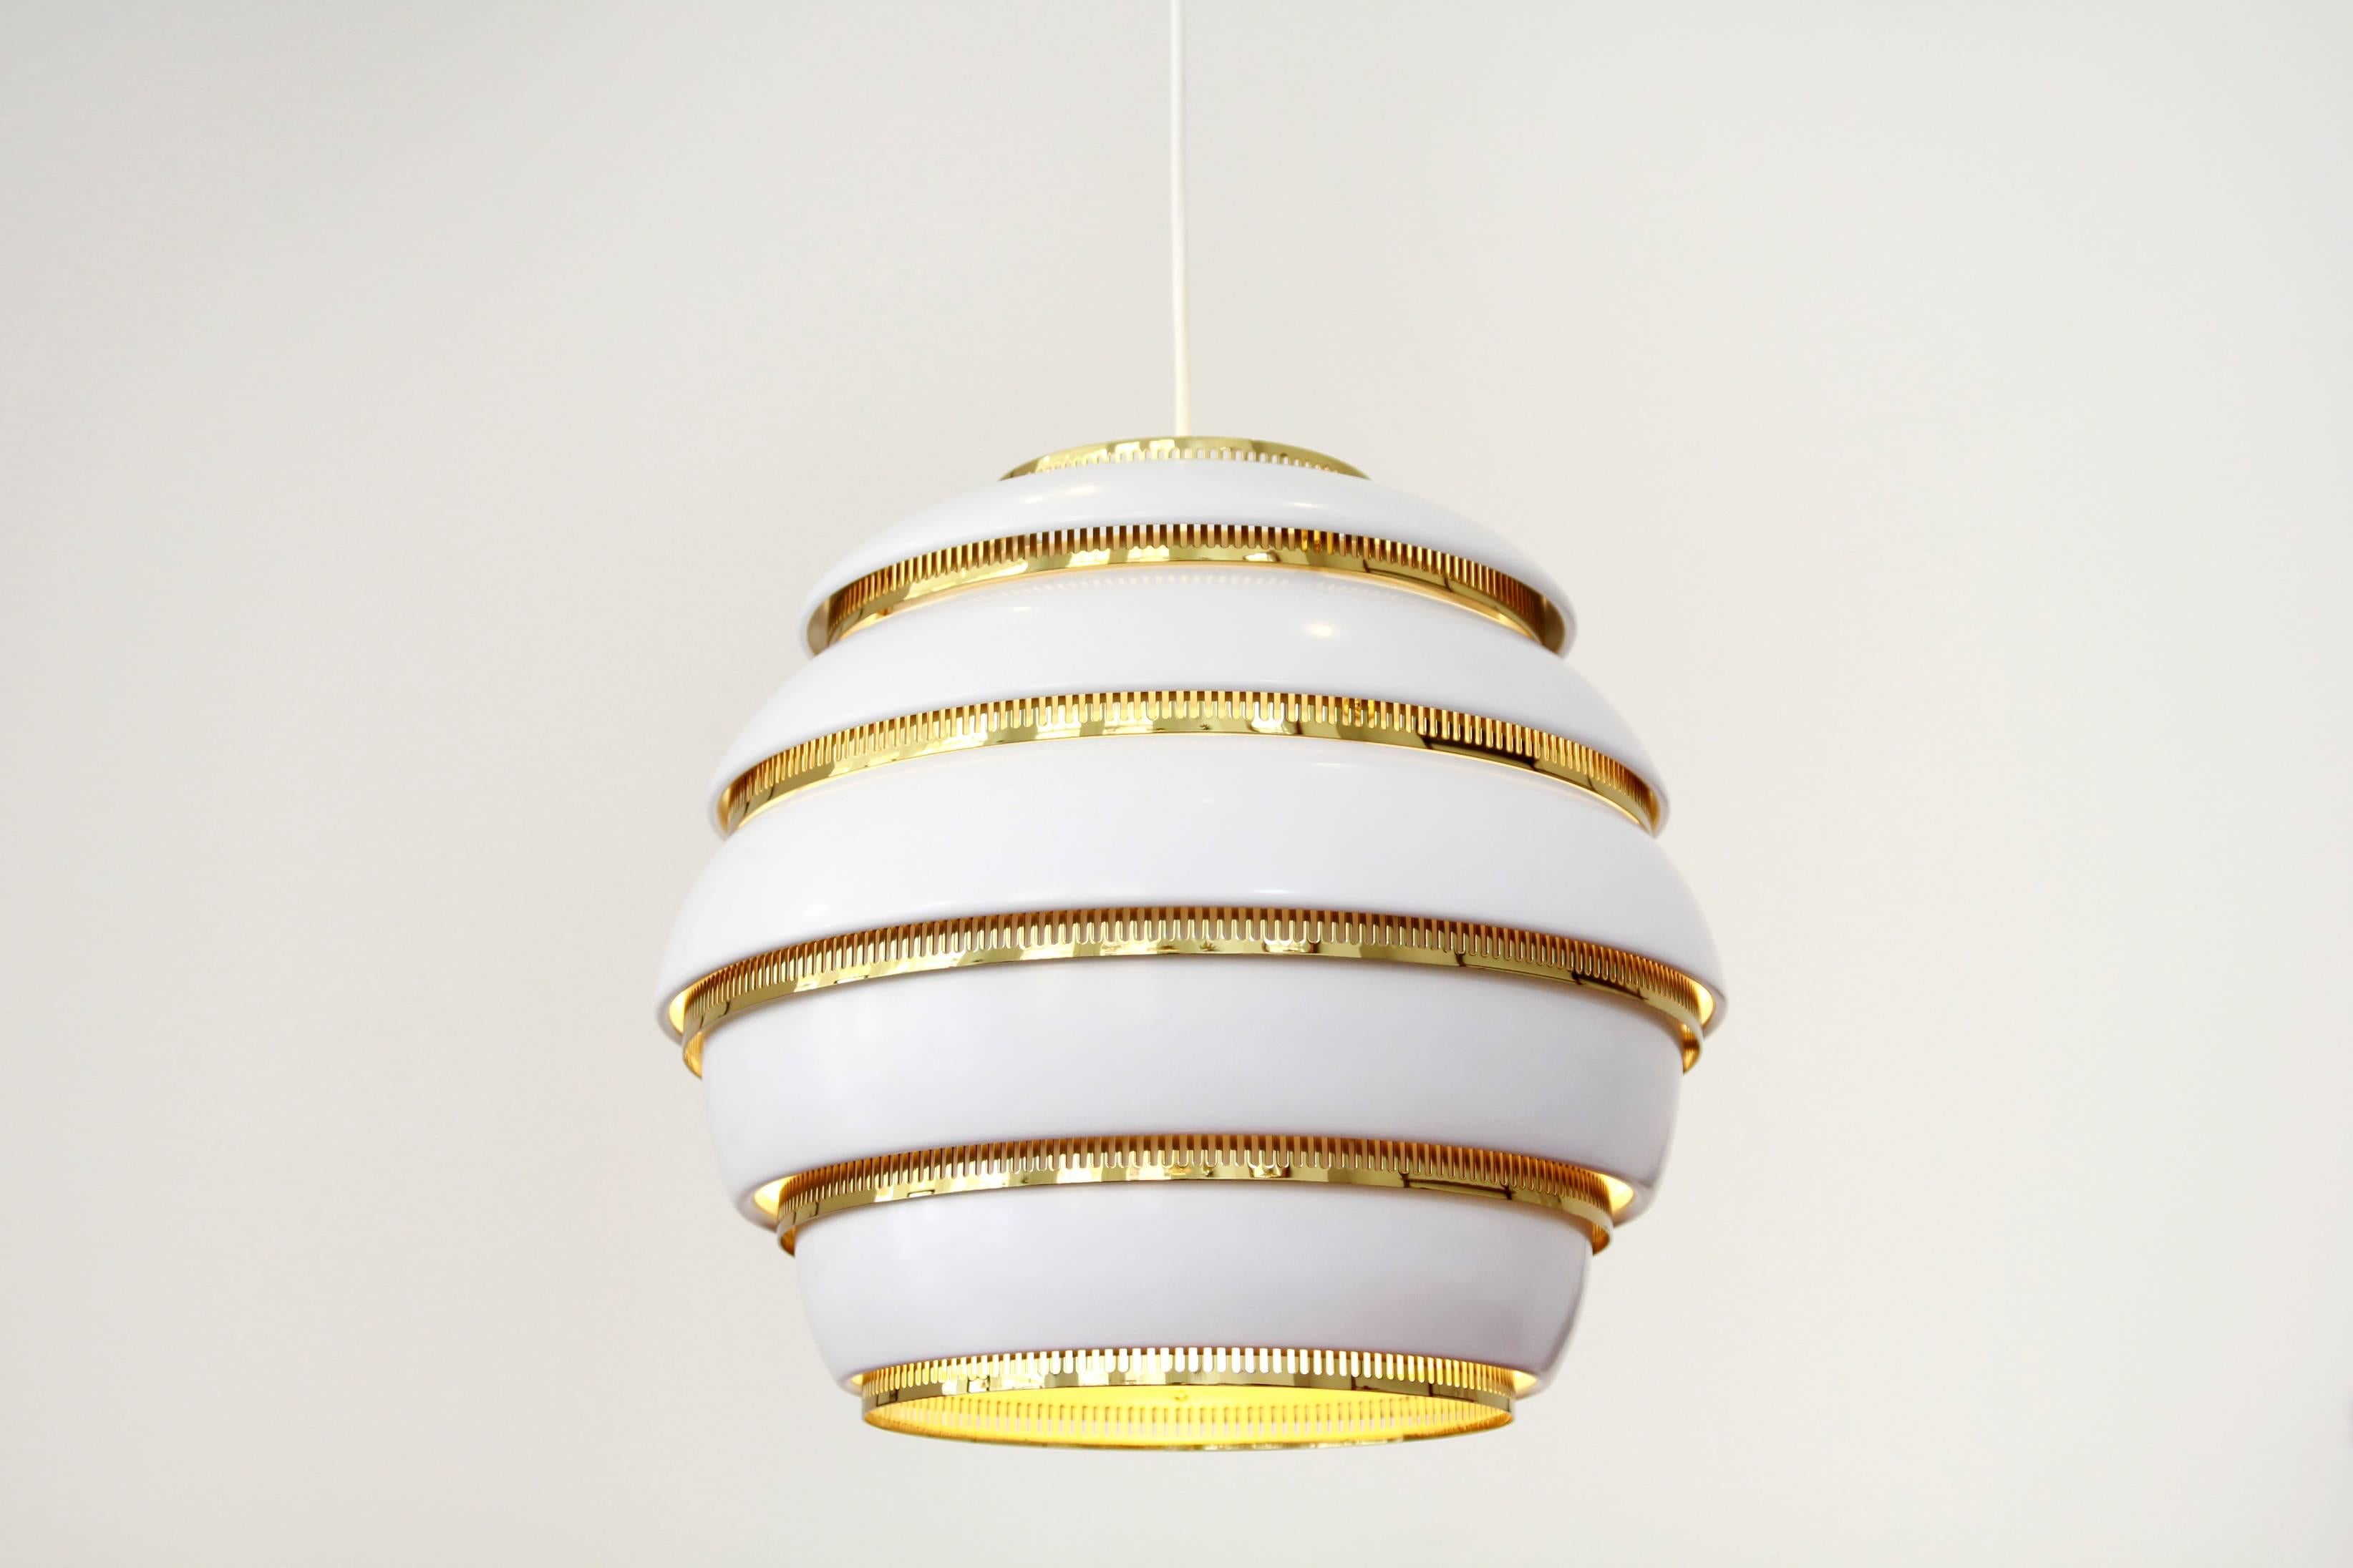 Beautiful Classic design lamp designed by Alvar Aalto in 1953. Also known as the Beehive. This lamp was first introduced as part of the design of the University of Jyväskylä in Finland and has since become one of Artek's most iconic lamps.
The lamp